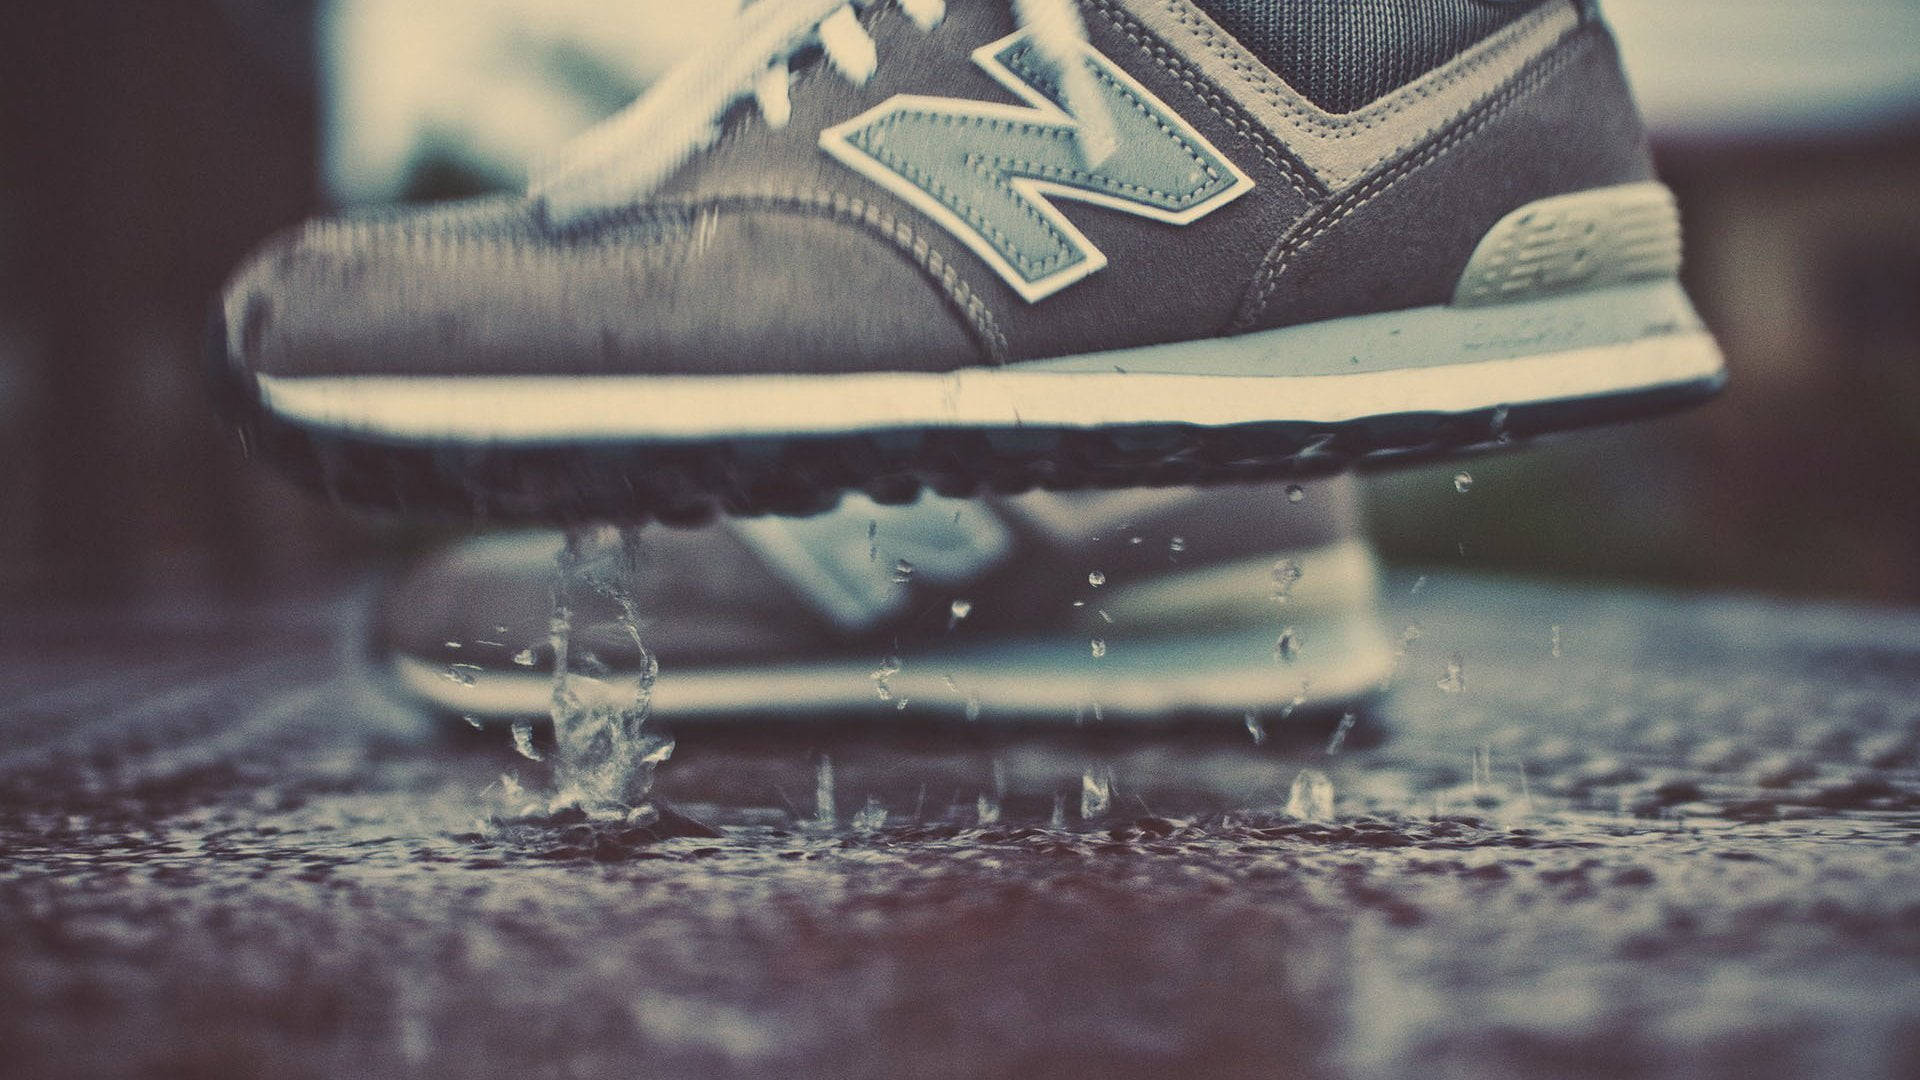 New Balance On Puddle Of Water Wallpaper